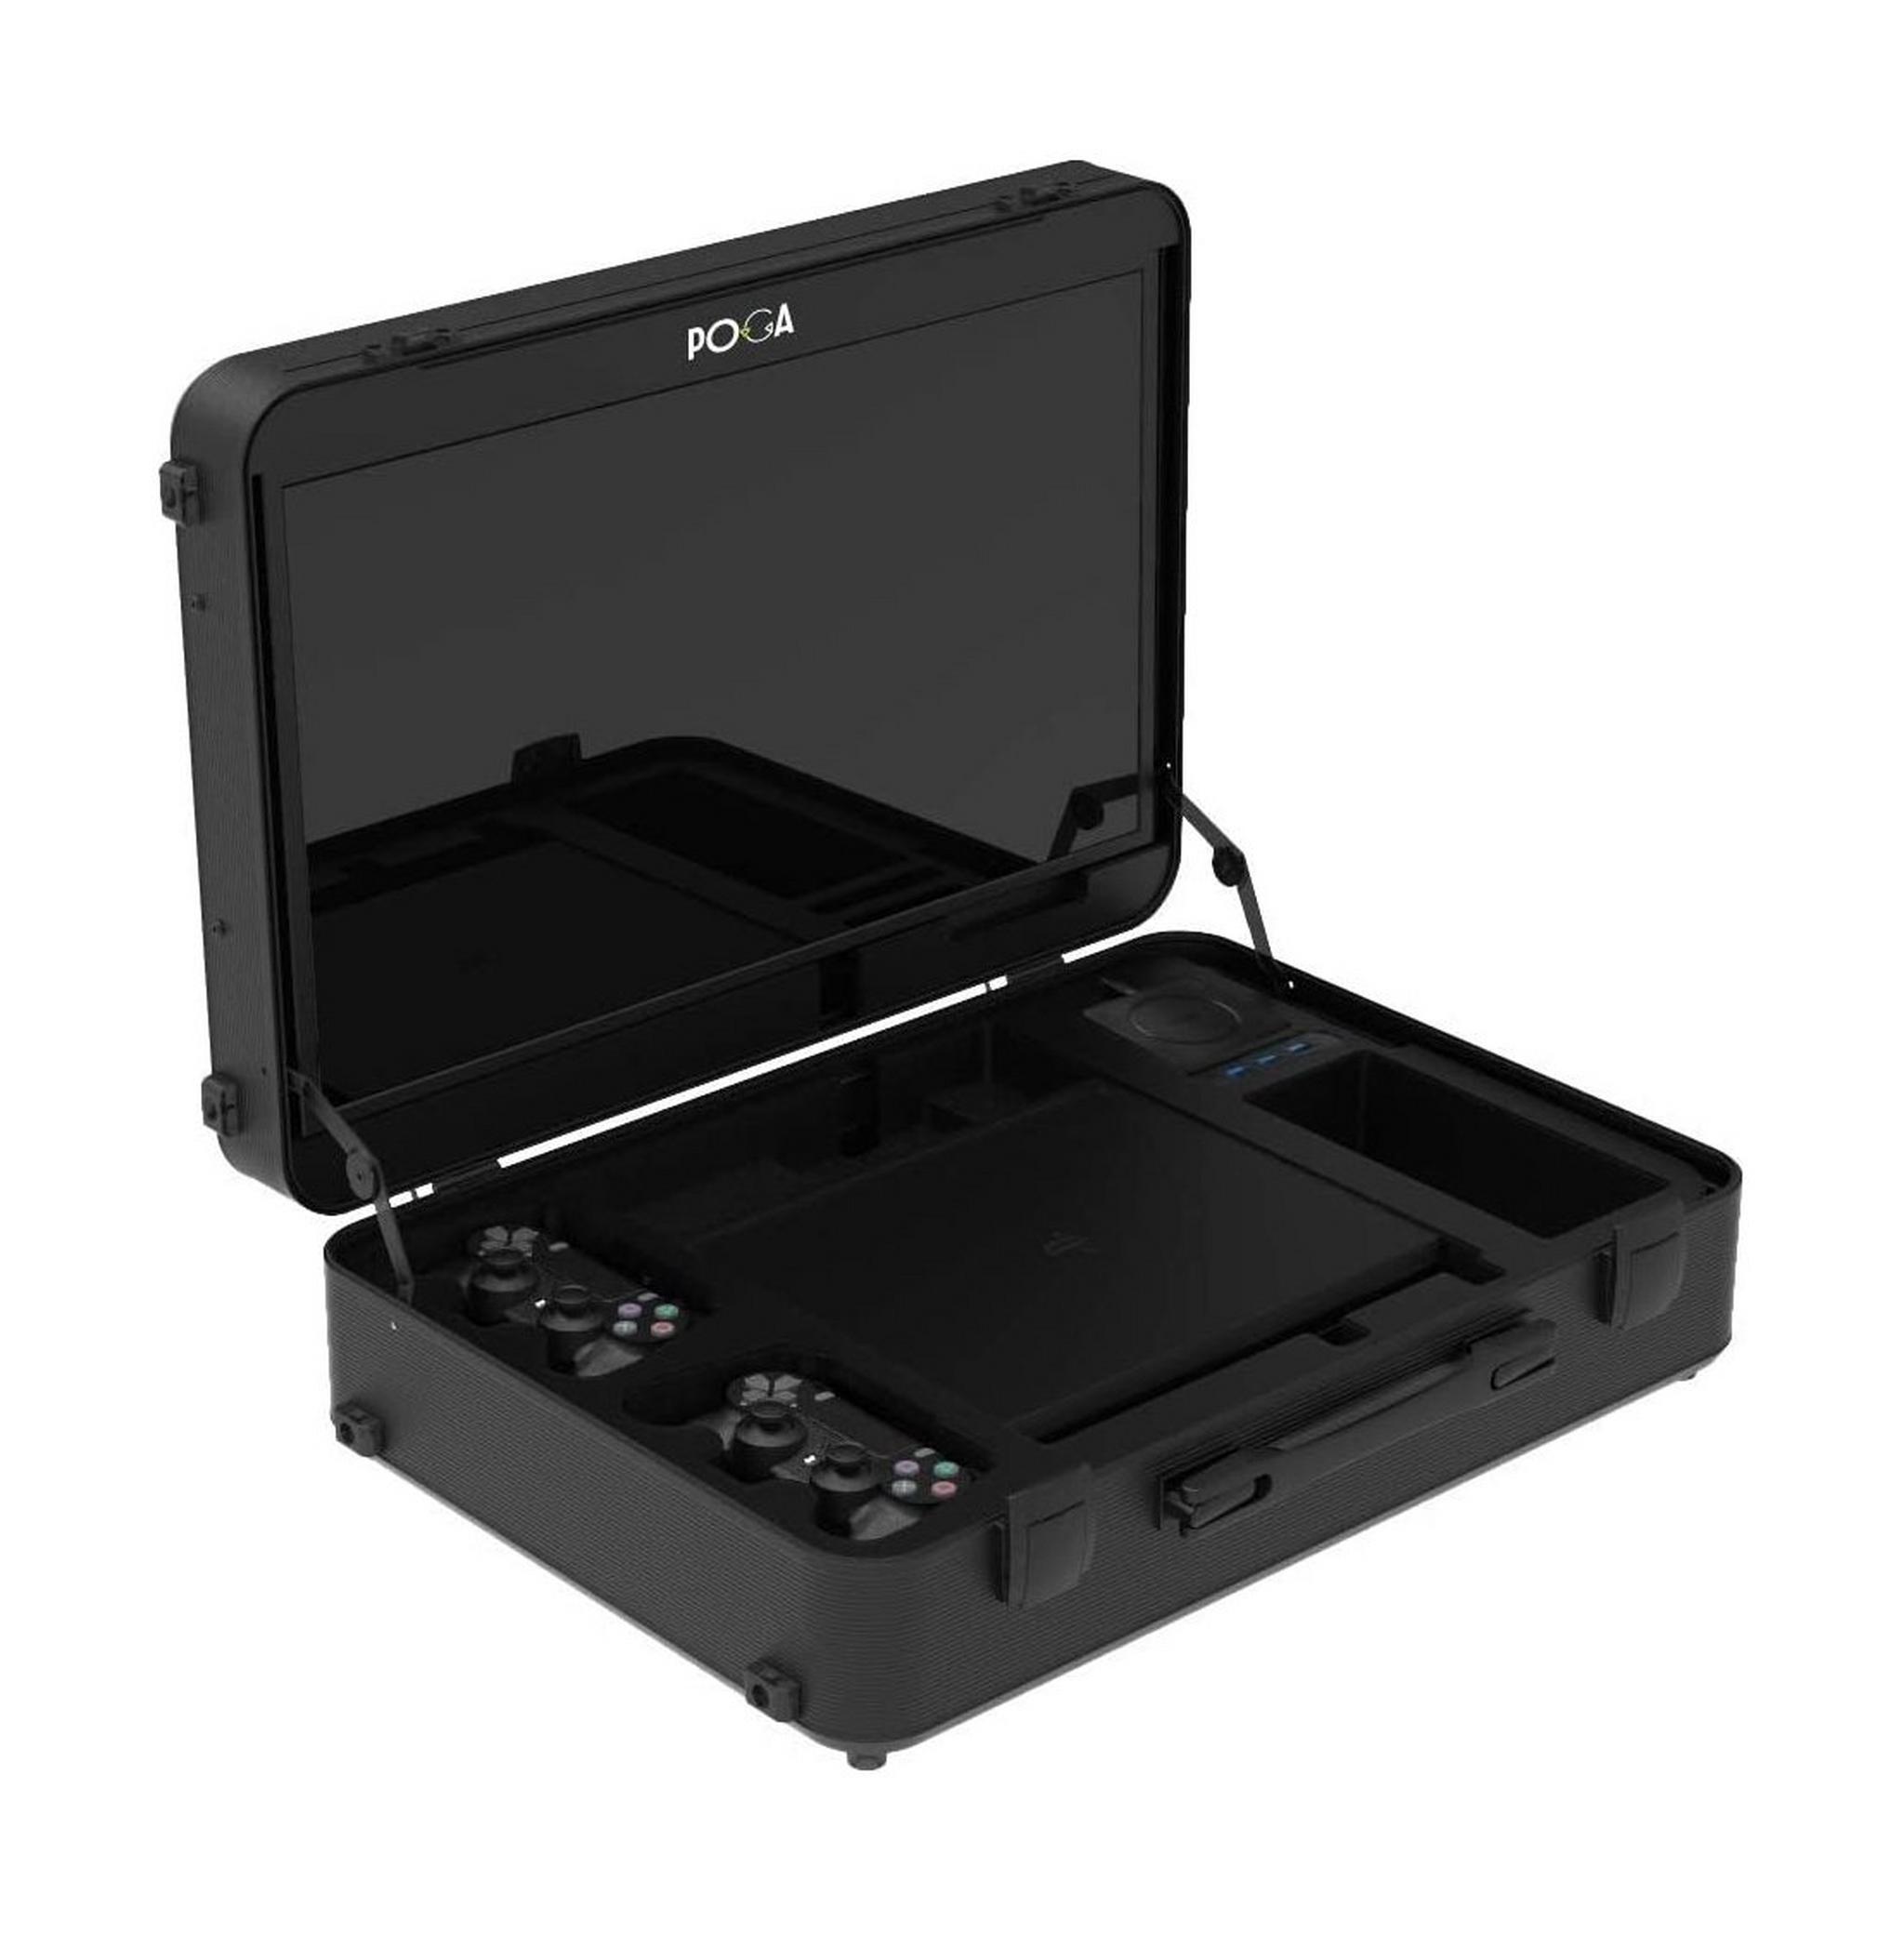 Indigaming Poga Pro Monitor with case for PS4 Slim - Black